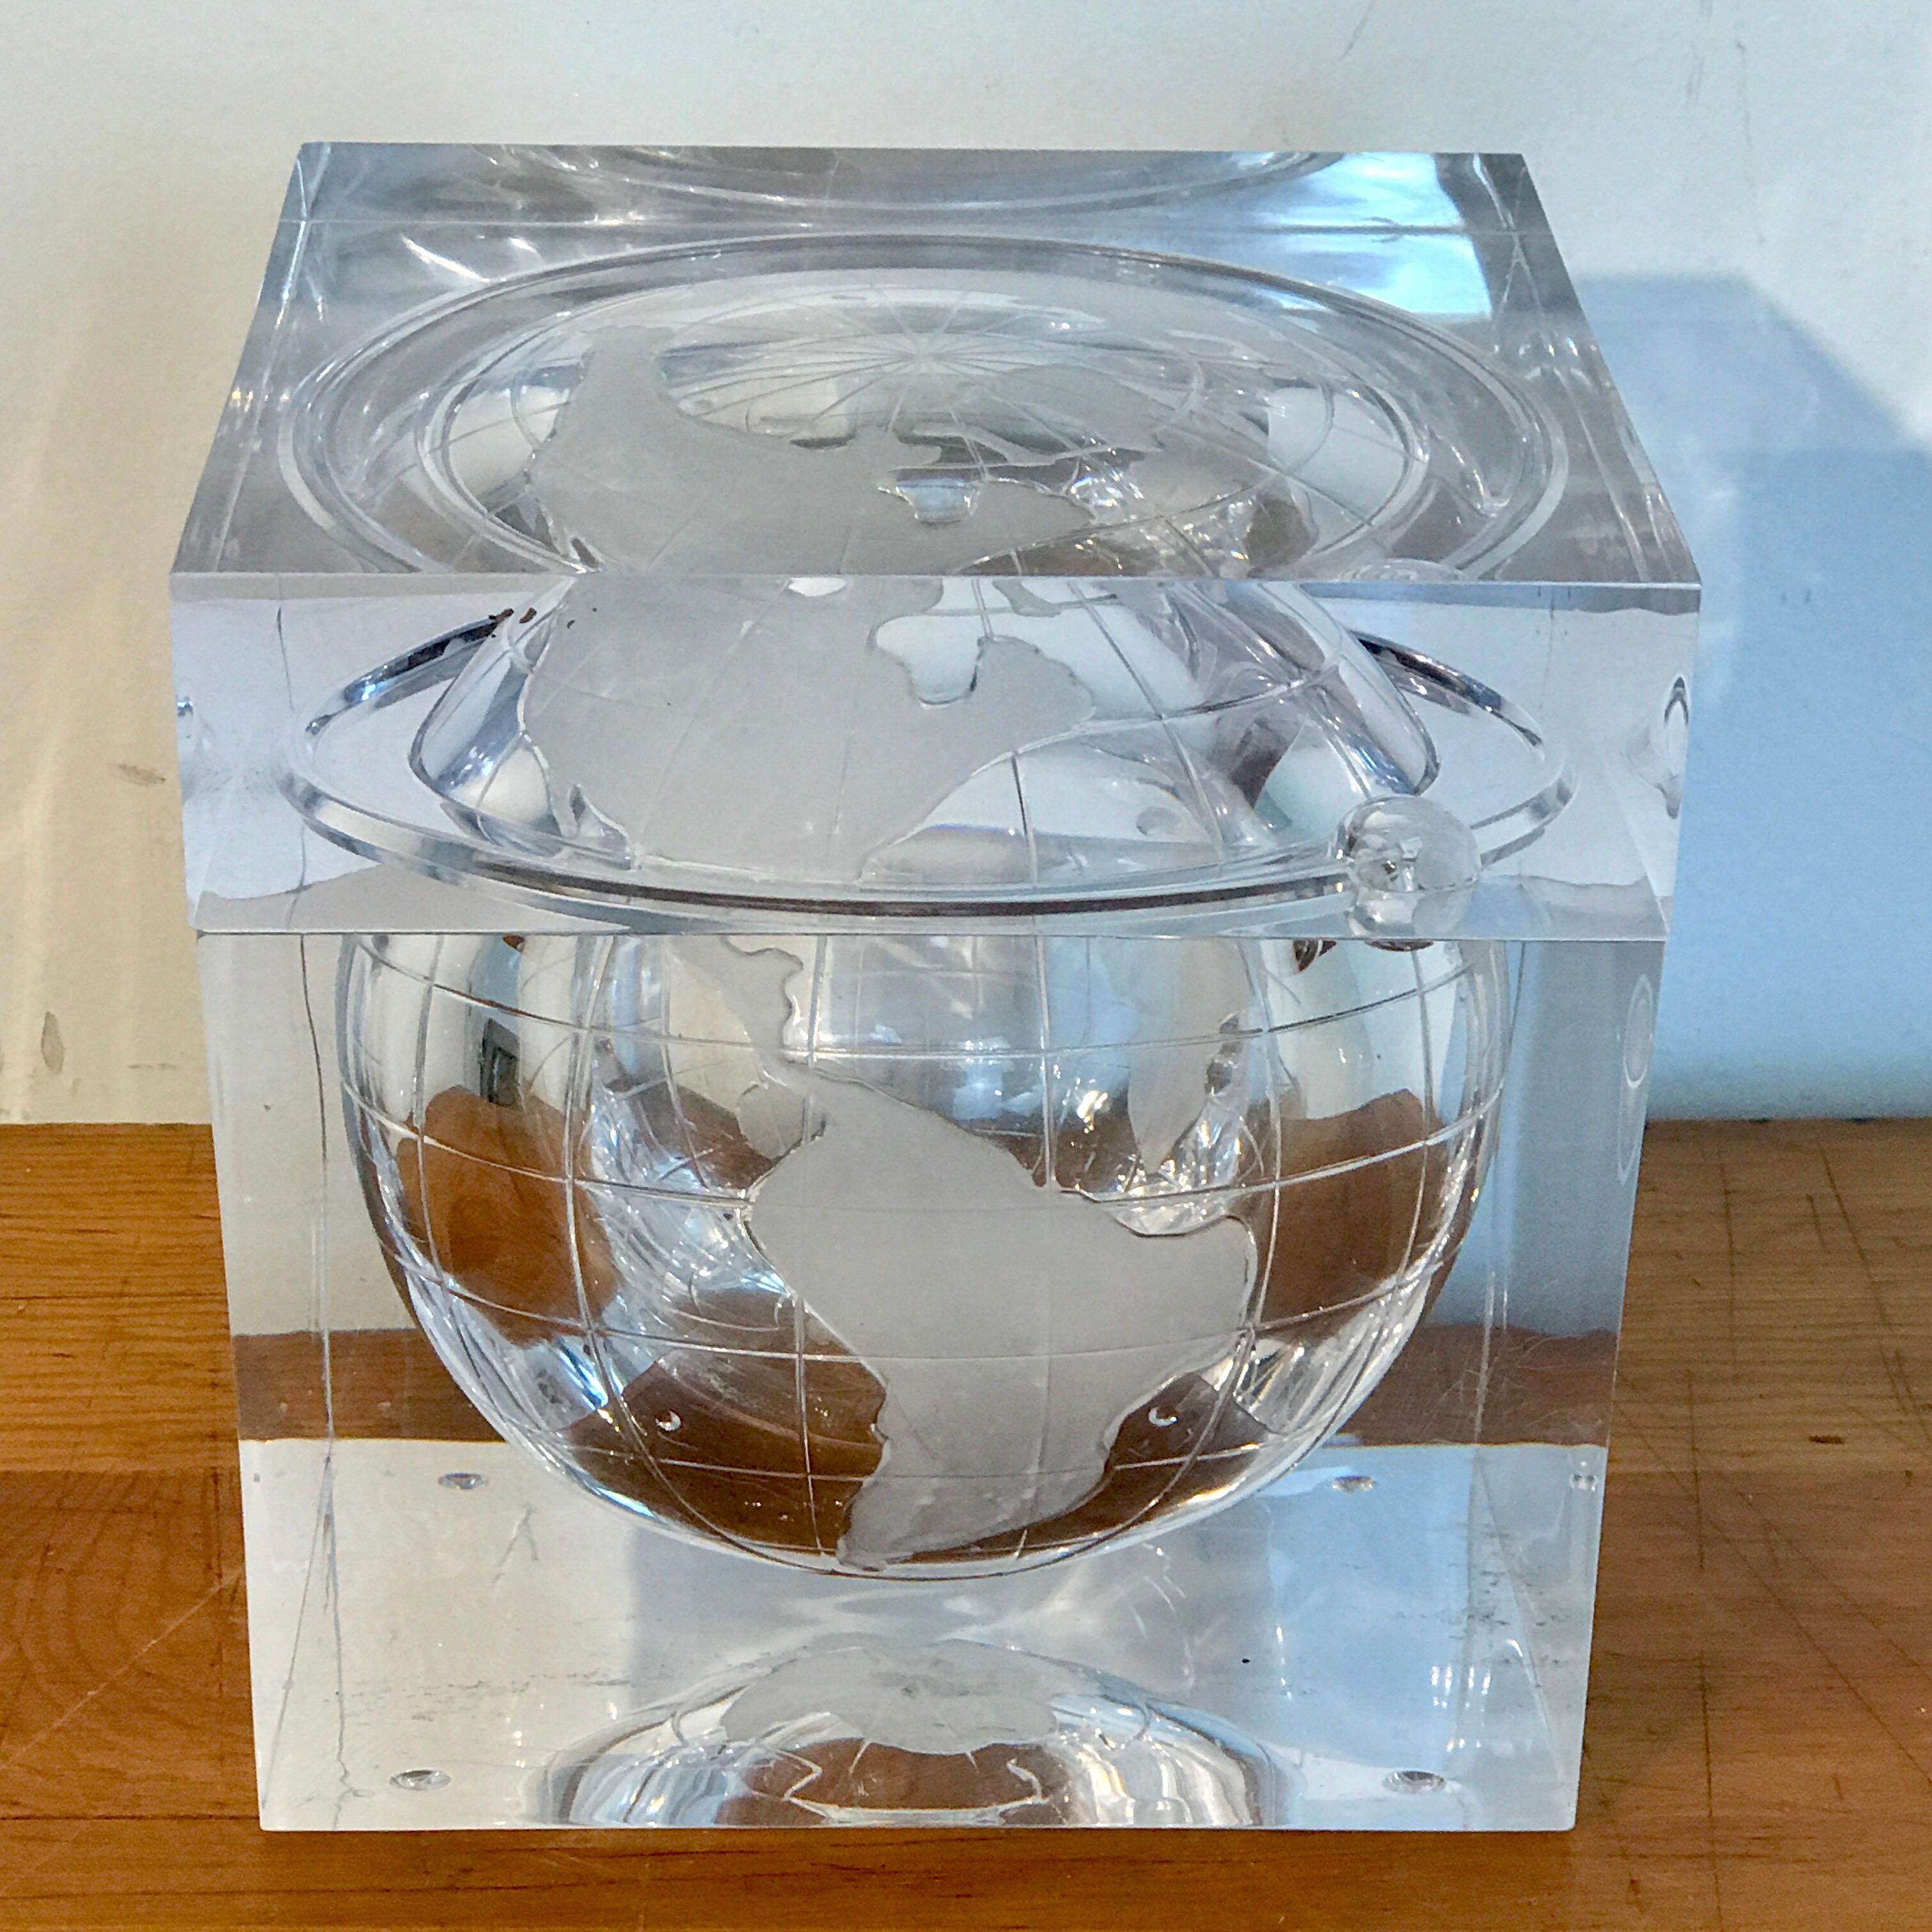 Midcentury Lucite globe ice bucket, in two parts with a removable top revealing a 5 x 5 inch interior
Depicting the earth and sun.